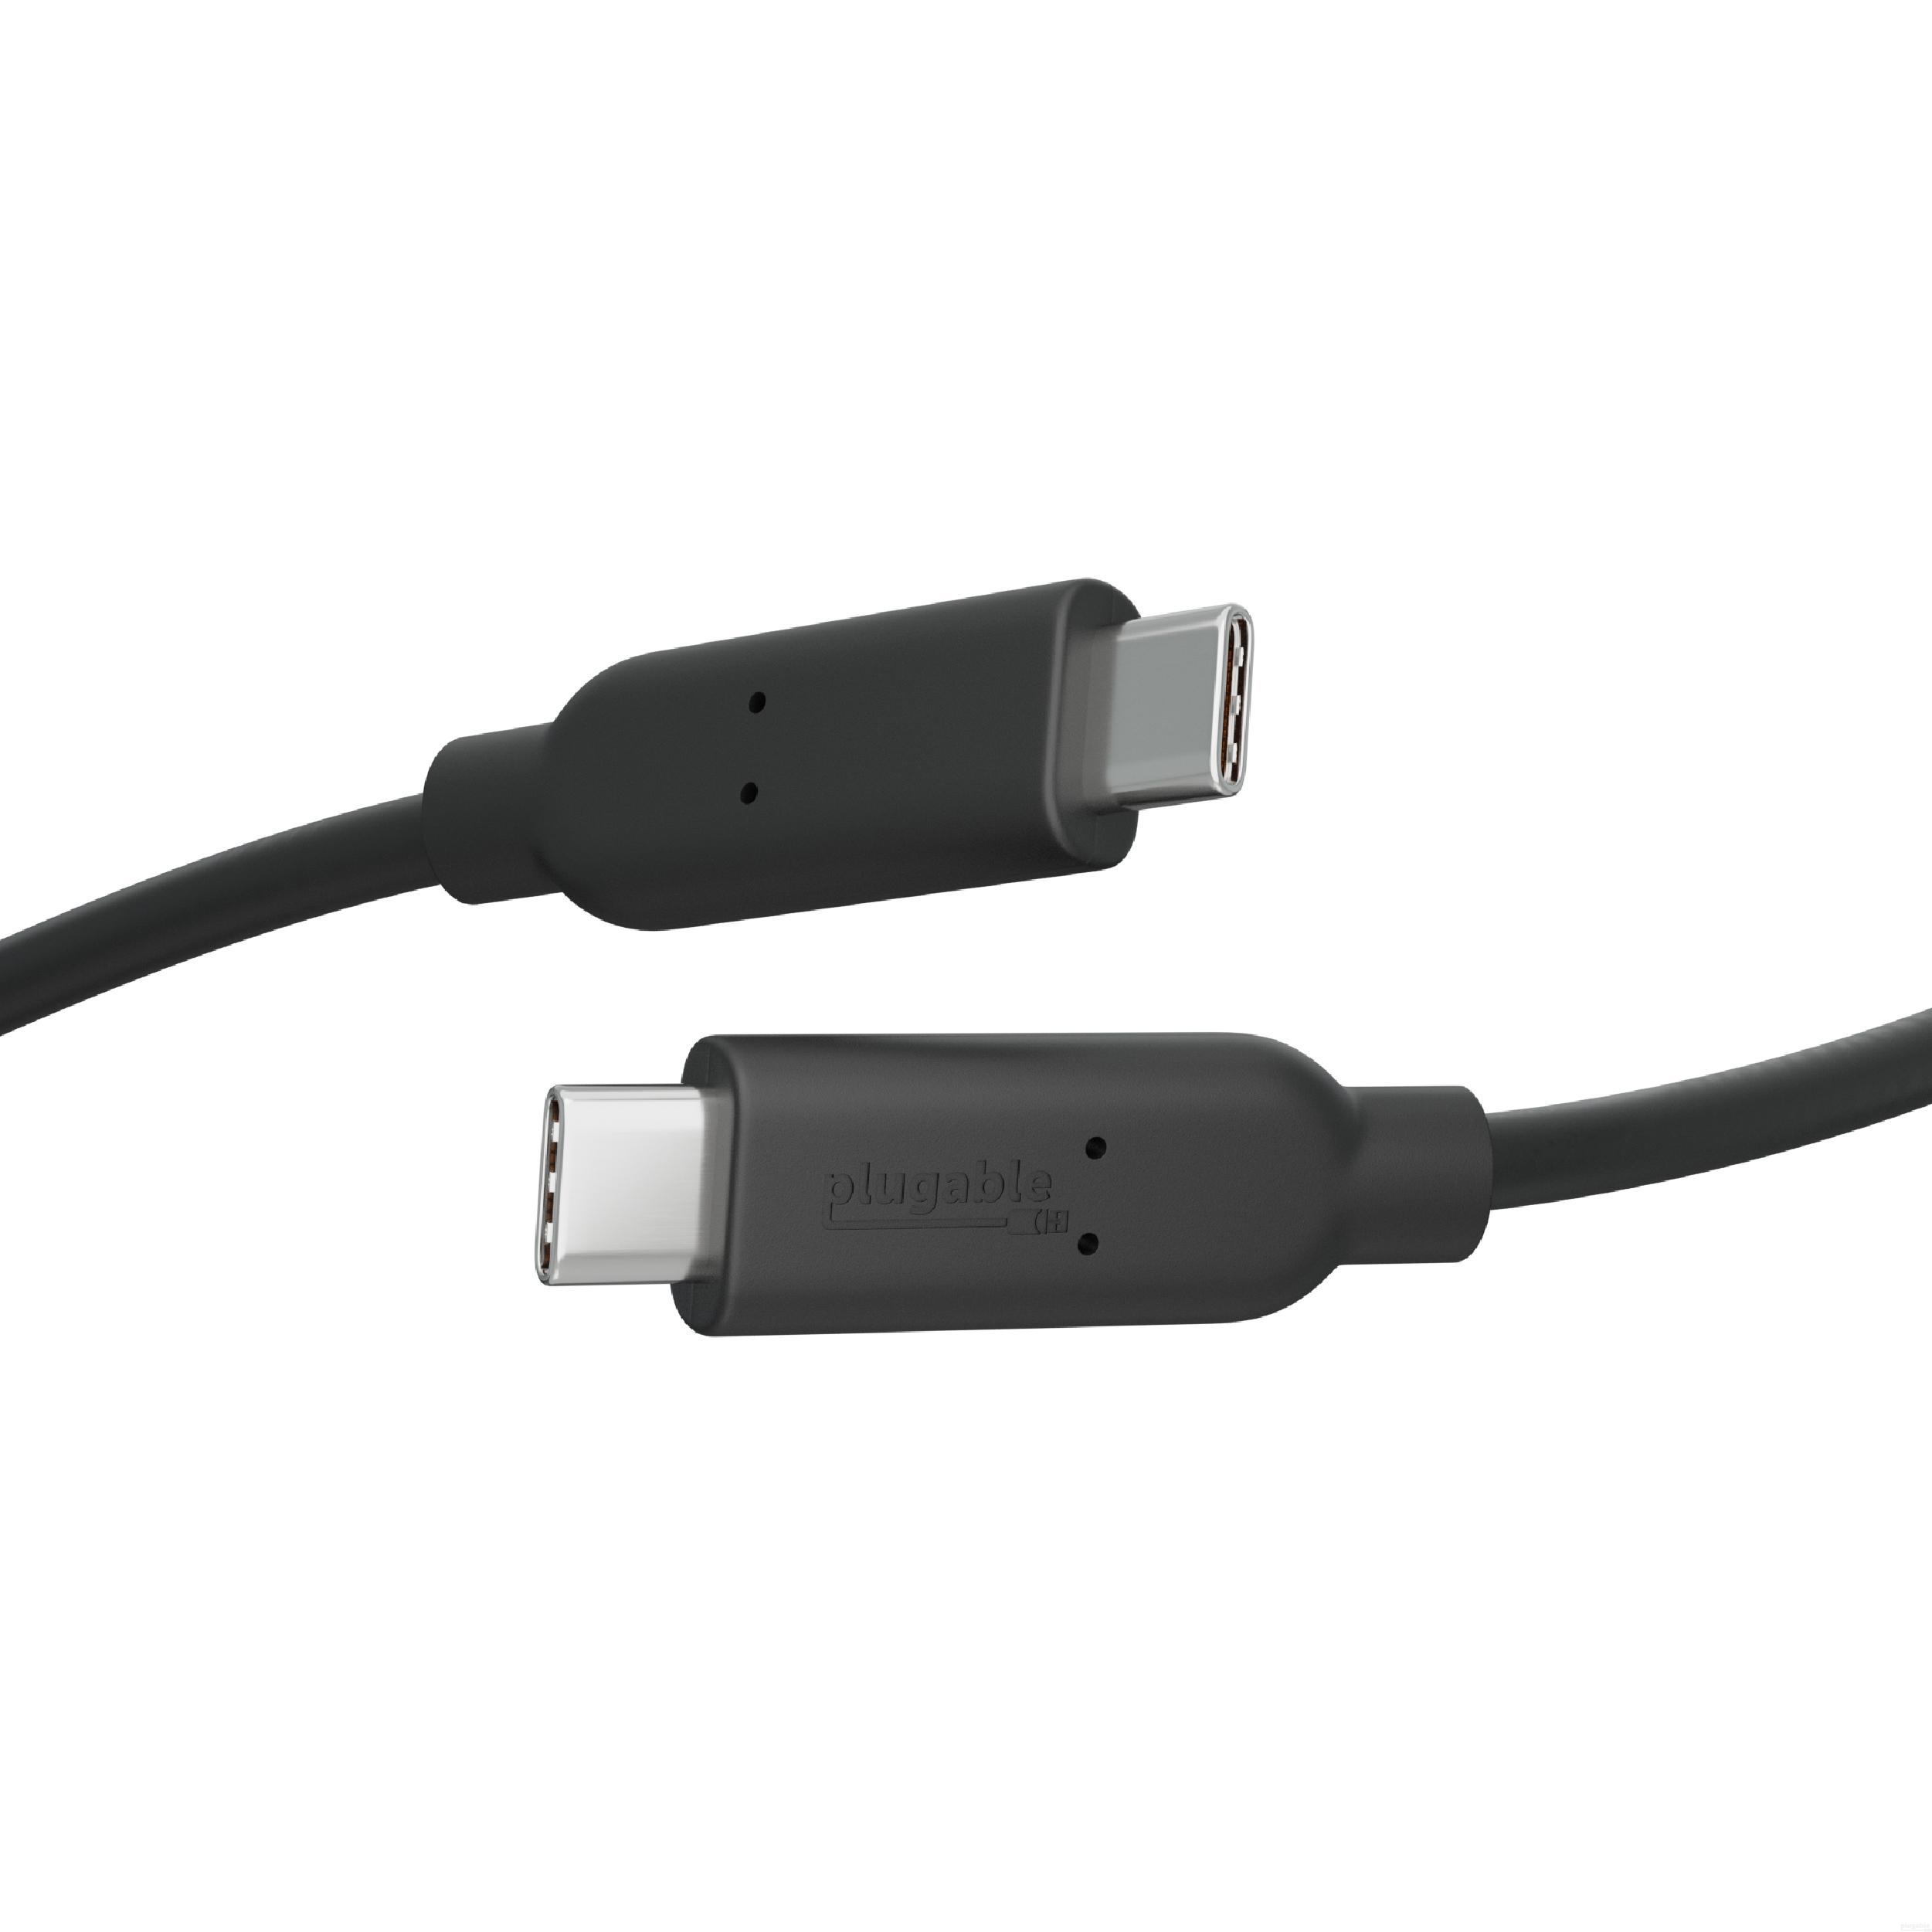 Plugable 10Gbps USB C to USB C Cable, 3.3 feet (1 Meter), 5A, USB-IF Certified, USB 3.1 Gen 2 Type-C - image 1 of 5